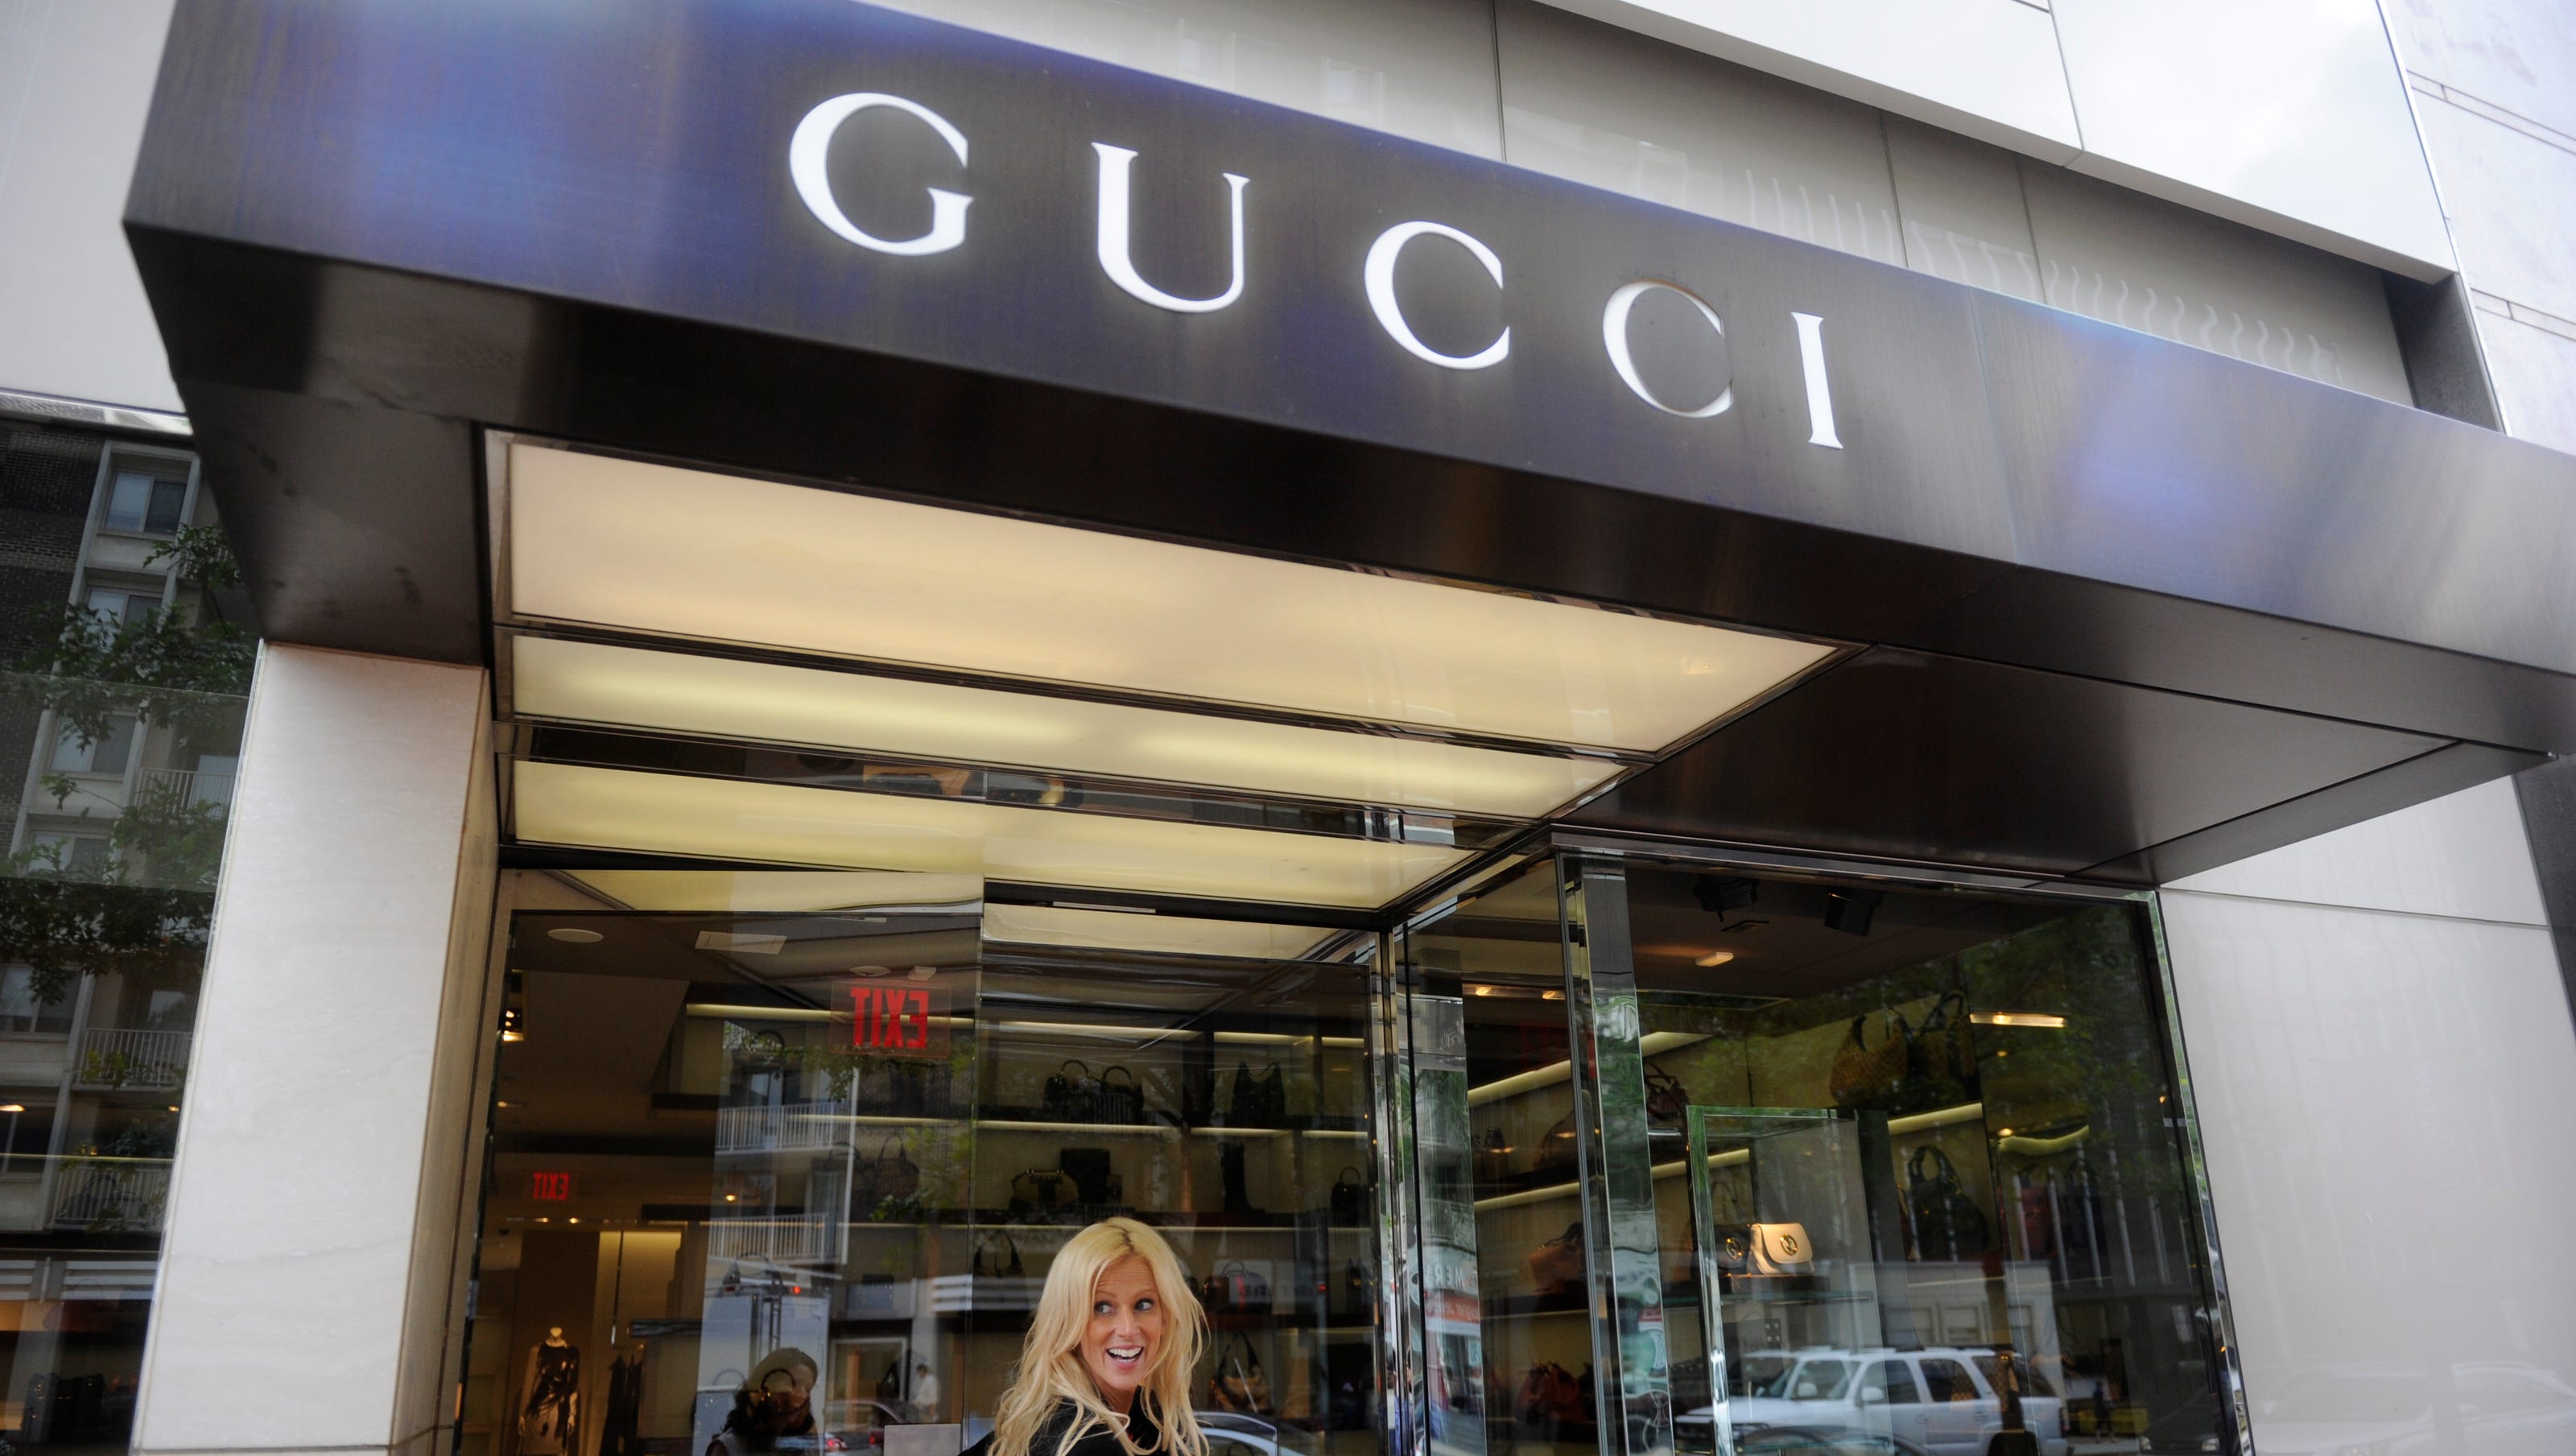 Gucci store is coming to Kenwood Towne Centre, opening date unknown